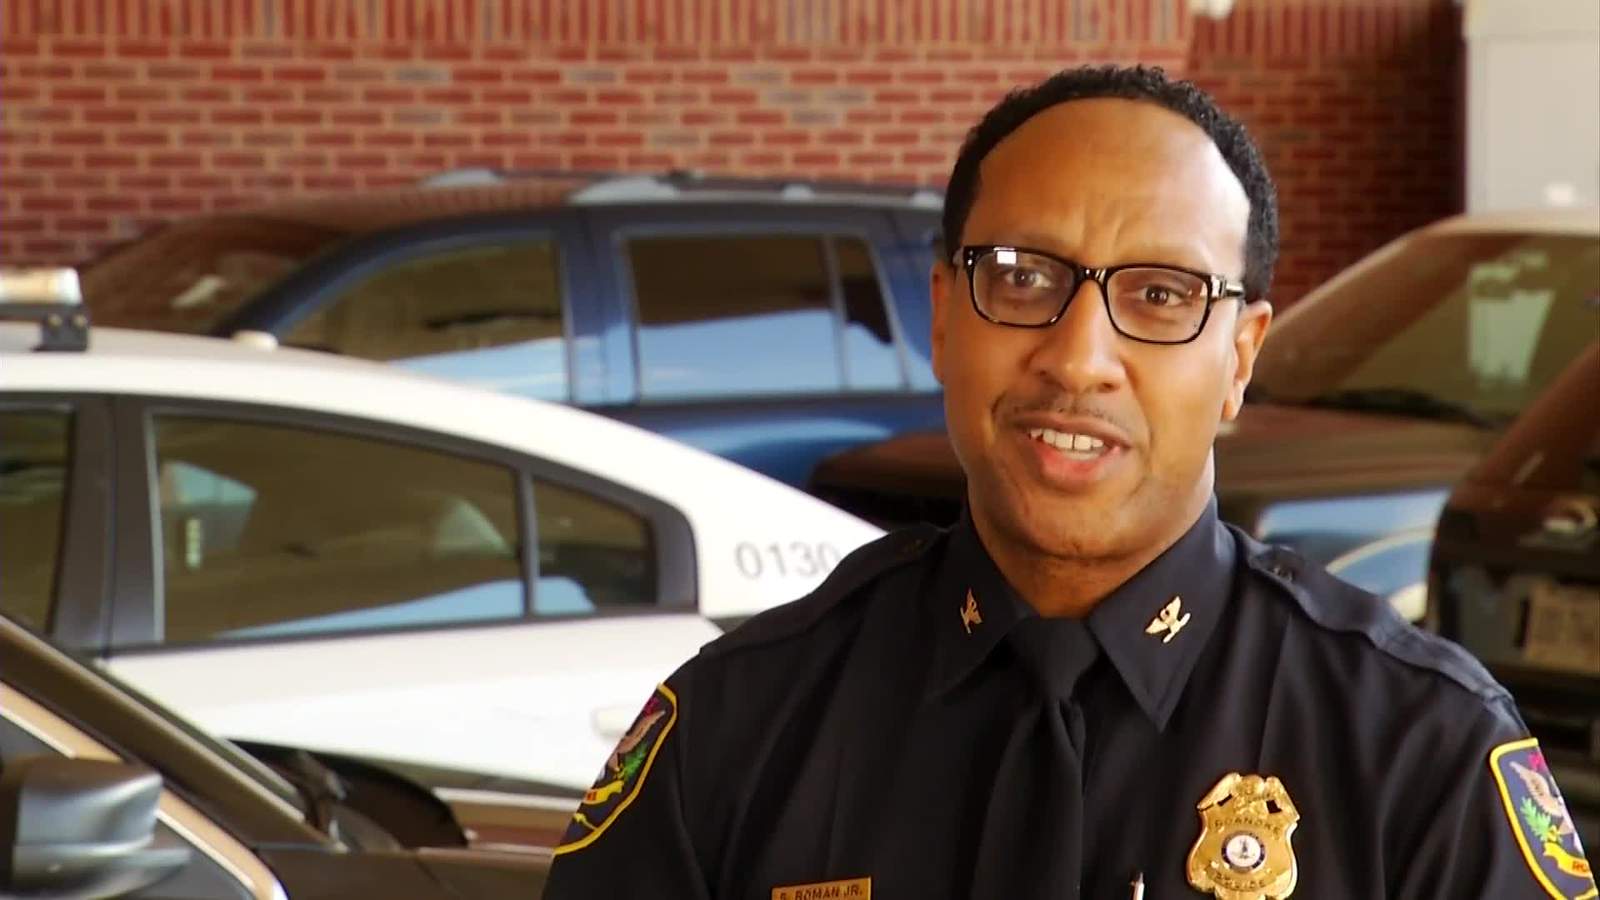 Roanoke’s new police chief on taking the reigns as the coronavirus spreads